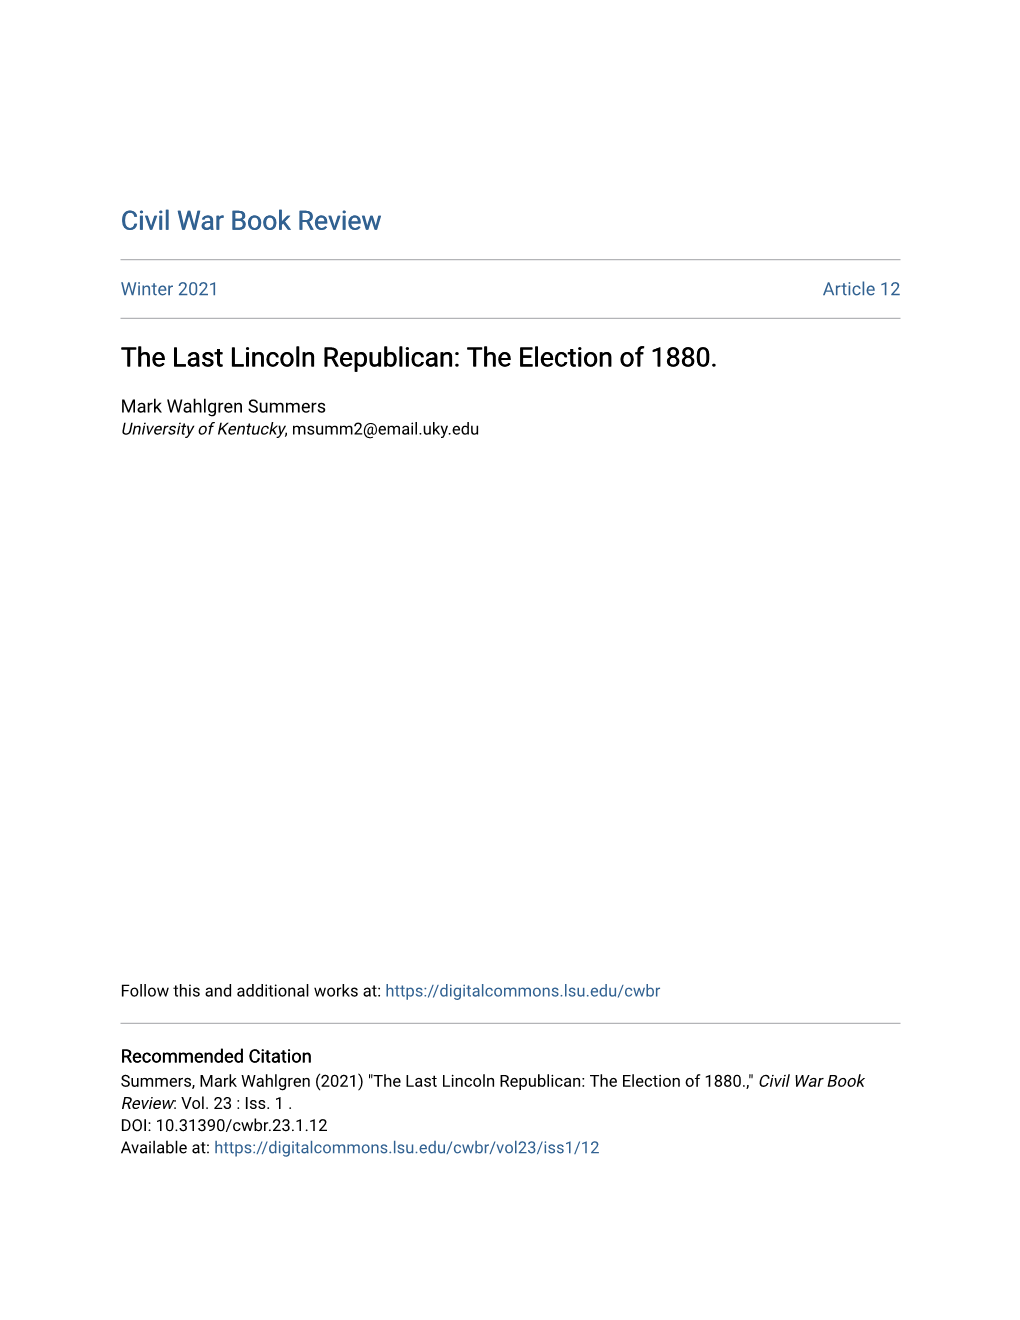 The Last Lincoln Republican: the Election of 1880